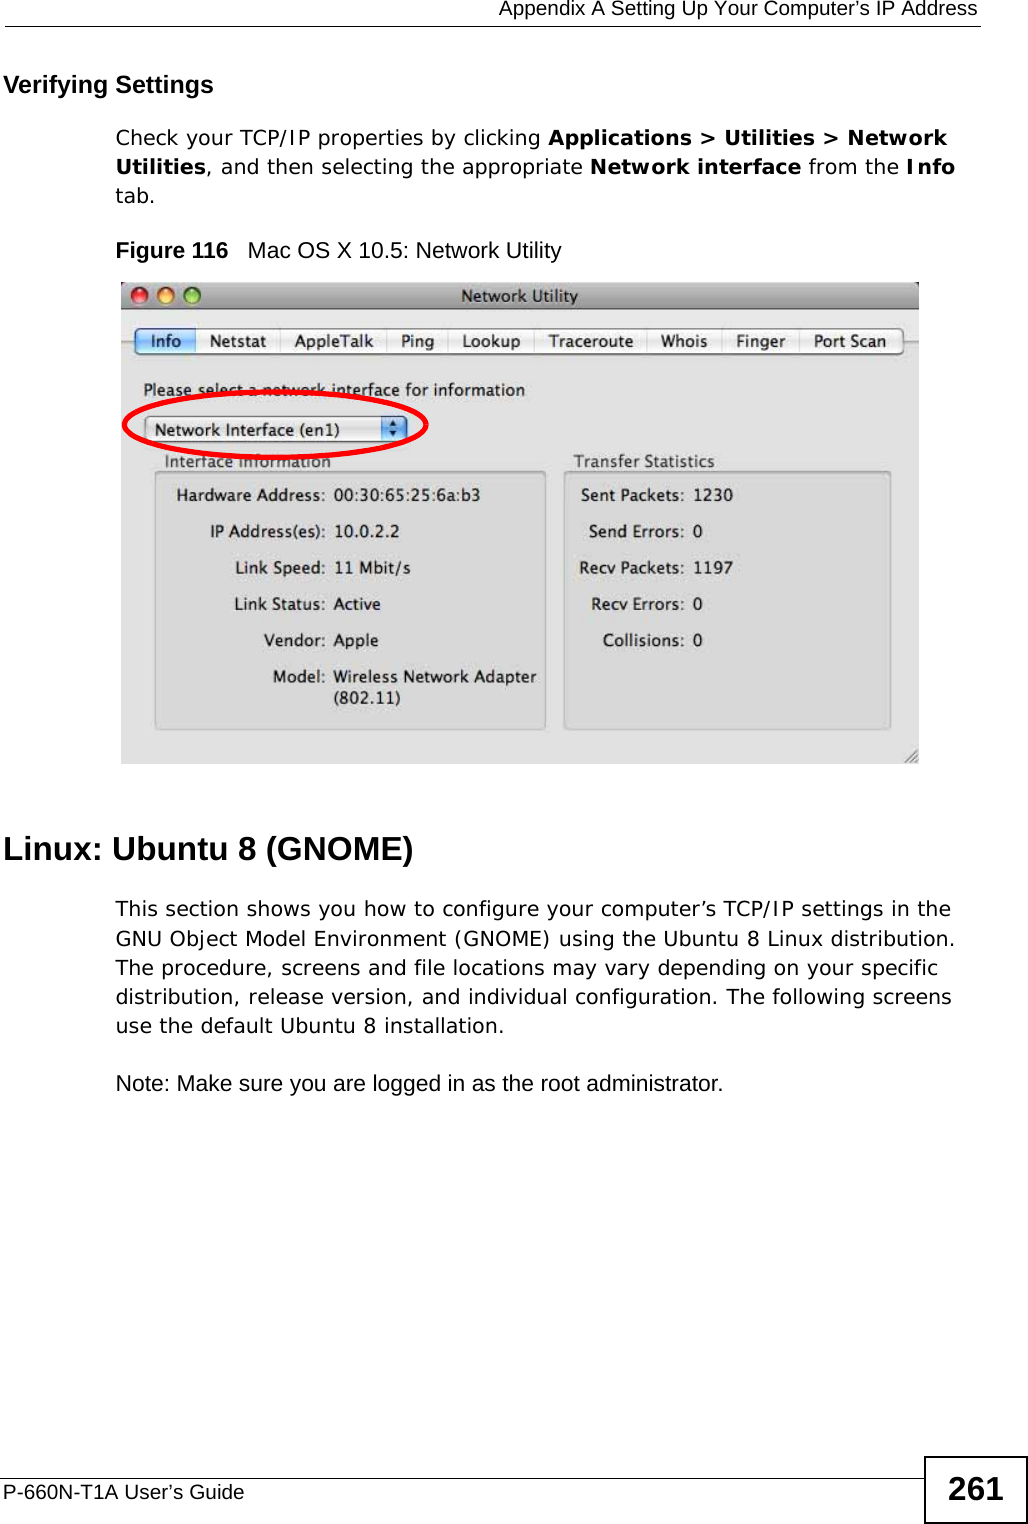  Appendix A Setting Up Your Computer’s IP AddressP-660N-T1A User’s Guide 261Verifying SettingsCheck your TCP/IP properties by clicking Applications &gt; Utilities &gt; Network Utilities, and then selecting the appropriate Network interface from the Info tab.Figure 116   Mac OS X 10.5: Network UtilityLinux: Ubuntu 8 (GNOME)This section shows you how to configure your computer’s TCP/IP settings in the GNU Object Model Environment (GNOME) using the Ubuntu 8 Linux distribution. The procedure, screens and file locations may vary depending on your specific distribution, release version, and individual configuration. The following screens use the default Ubuntu 8 installation.Note: Make sure you are logged in as the root administrator. 